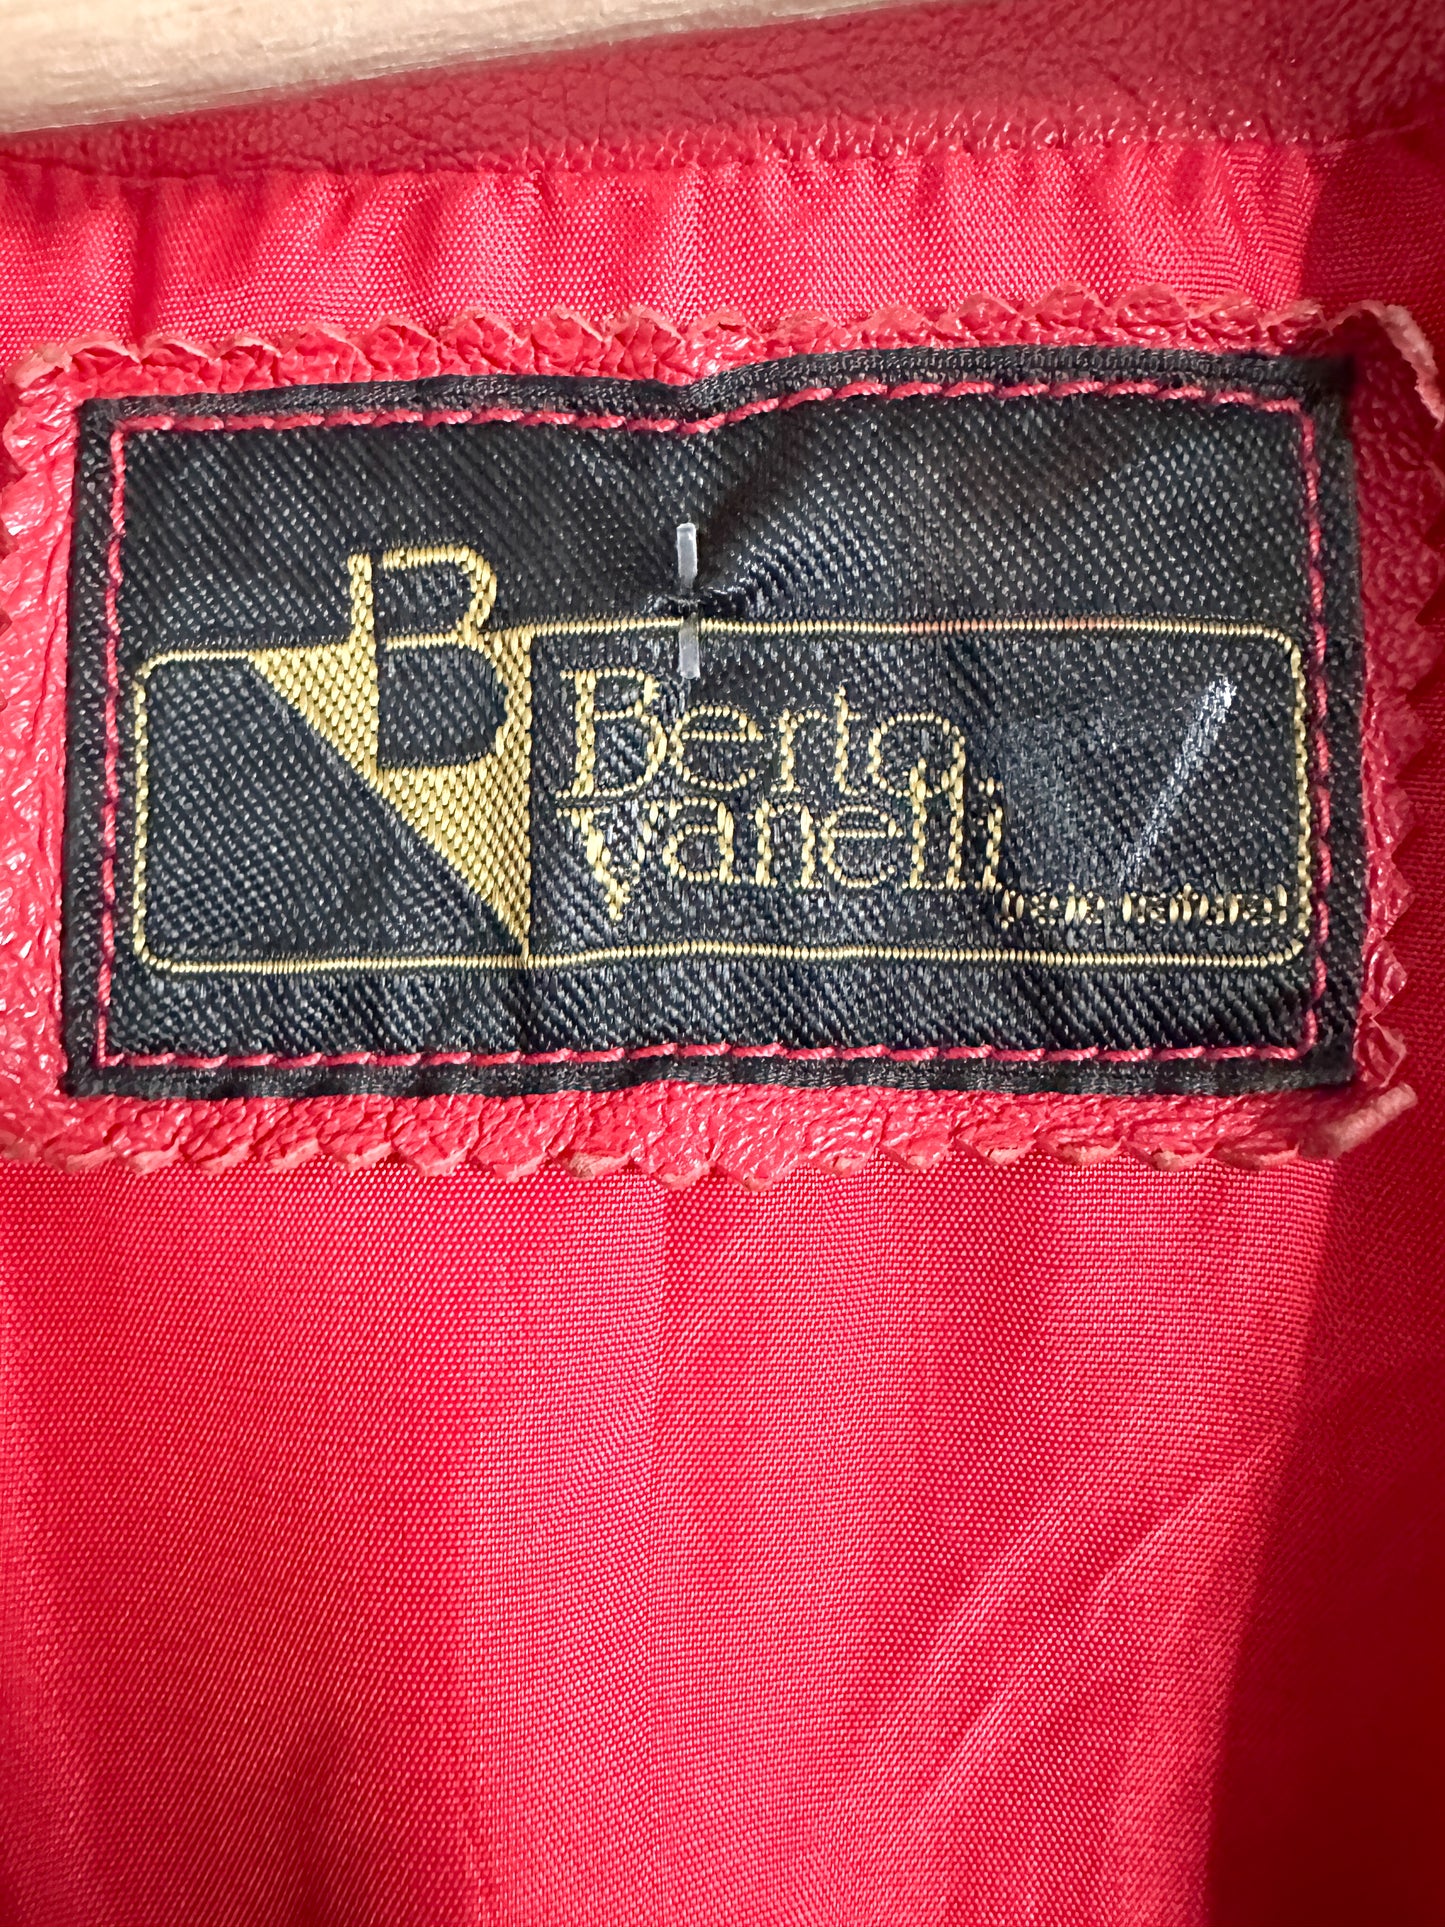 Red Leather Bomber Jacket | Berto Vanelli Red Leather Jacket| Cropped Red Leather Jacket